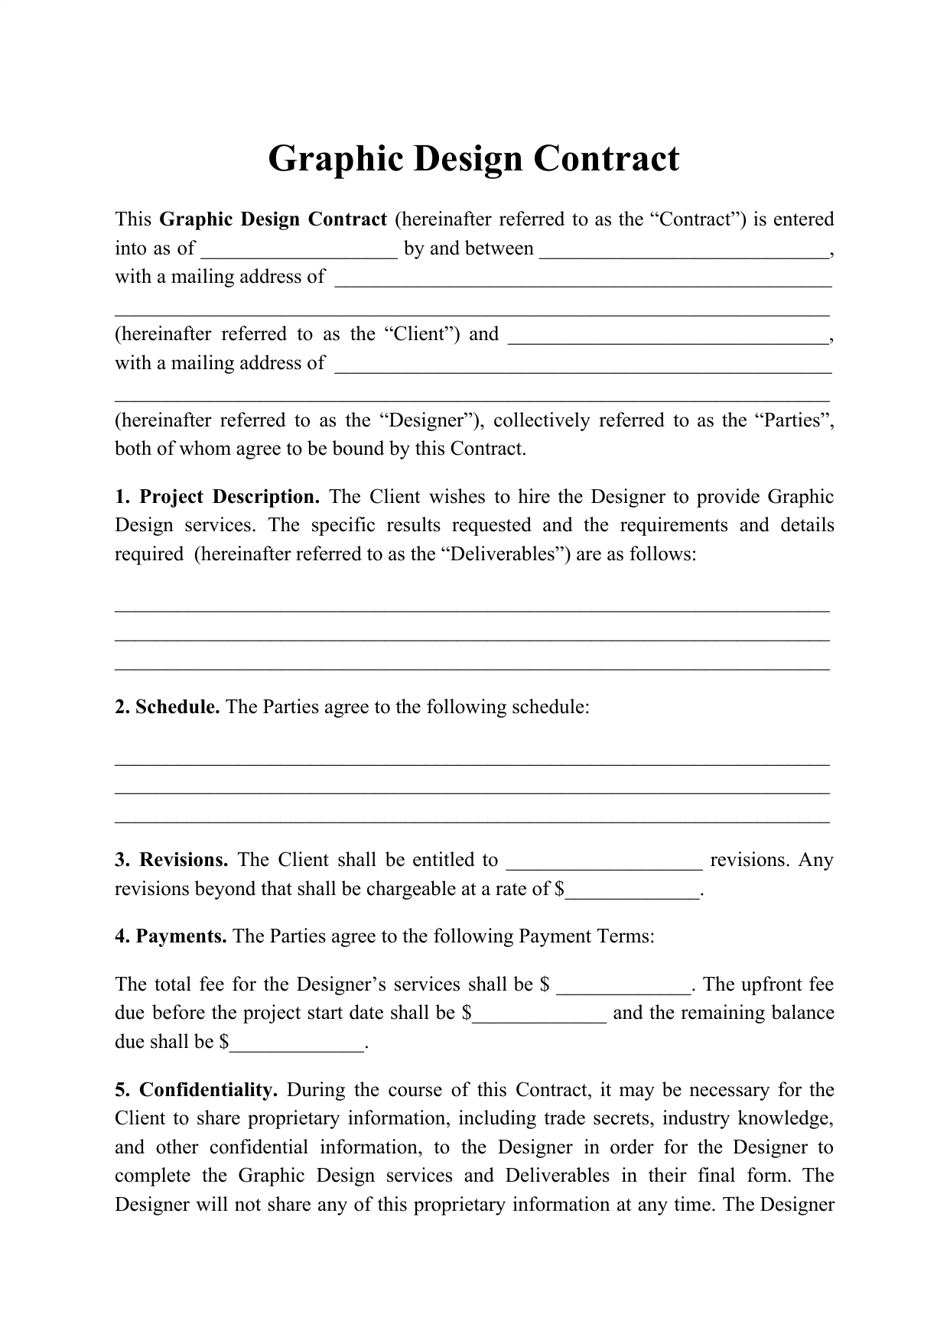 Graphic Design Contract Template, Page 1